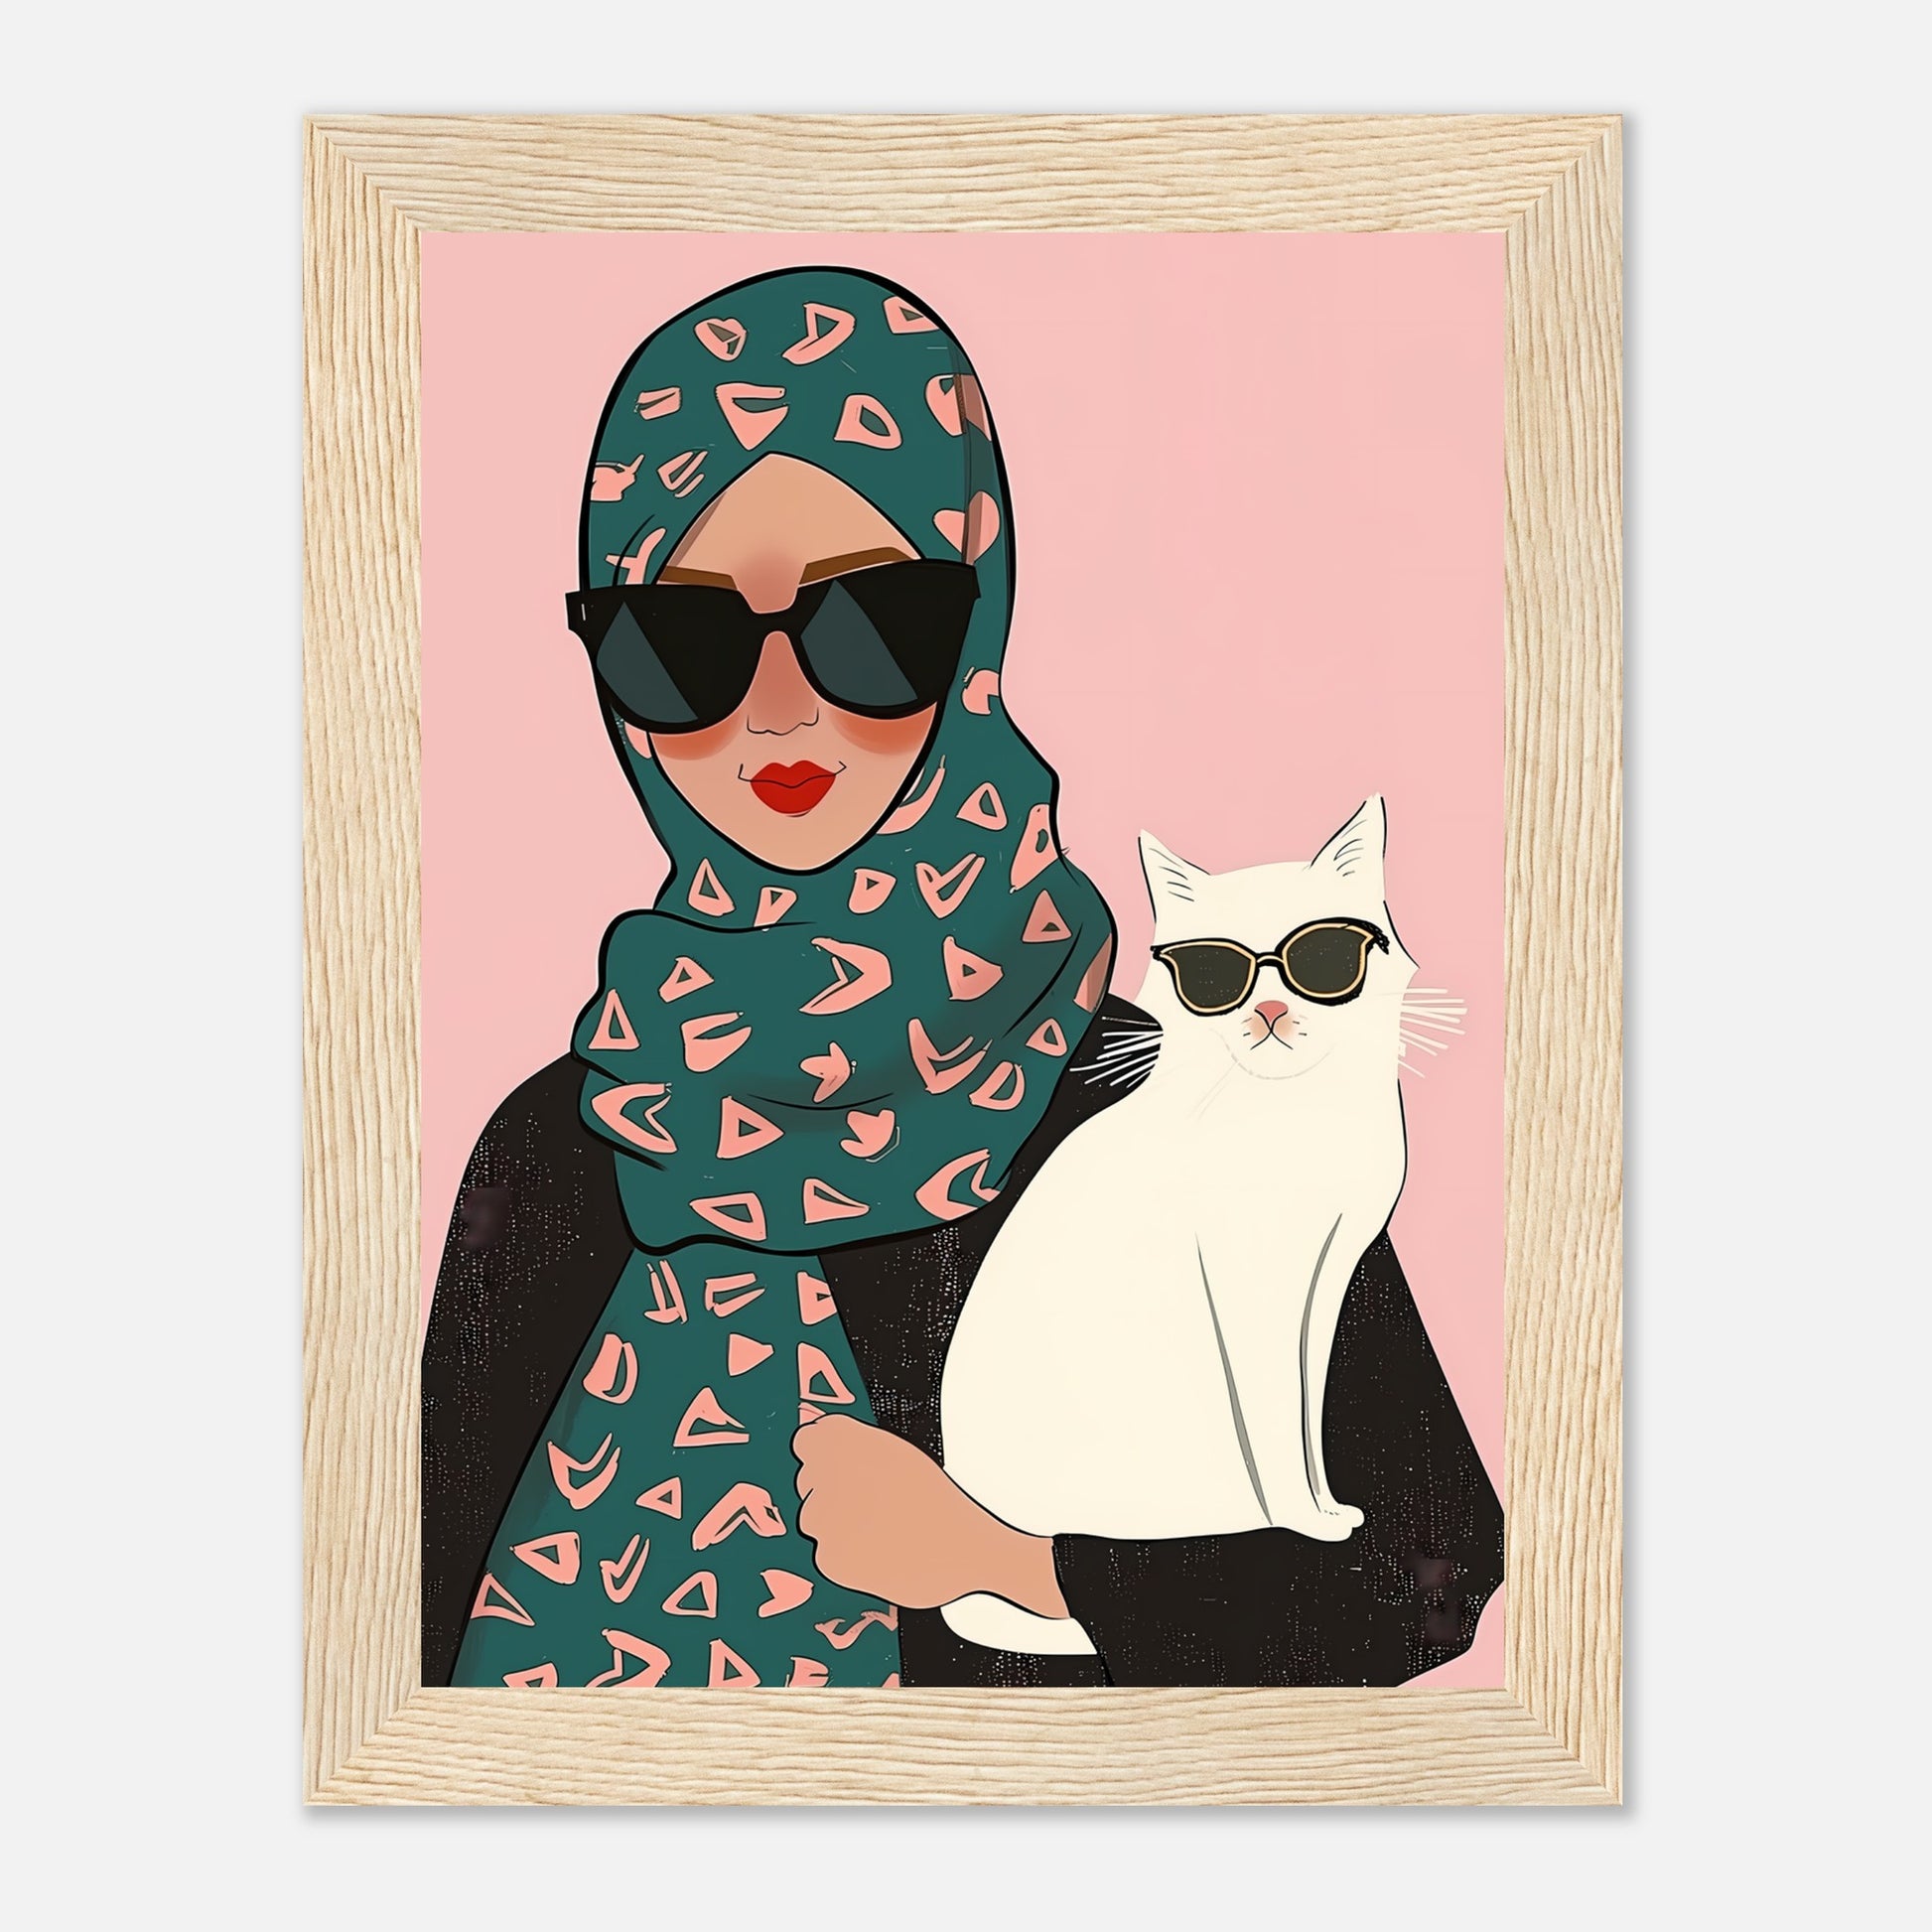 Illustration of a stylish woman with a hijab holding a cat wearing sunglasses.